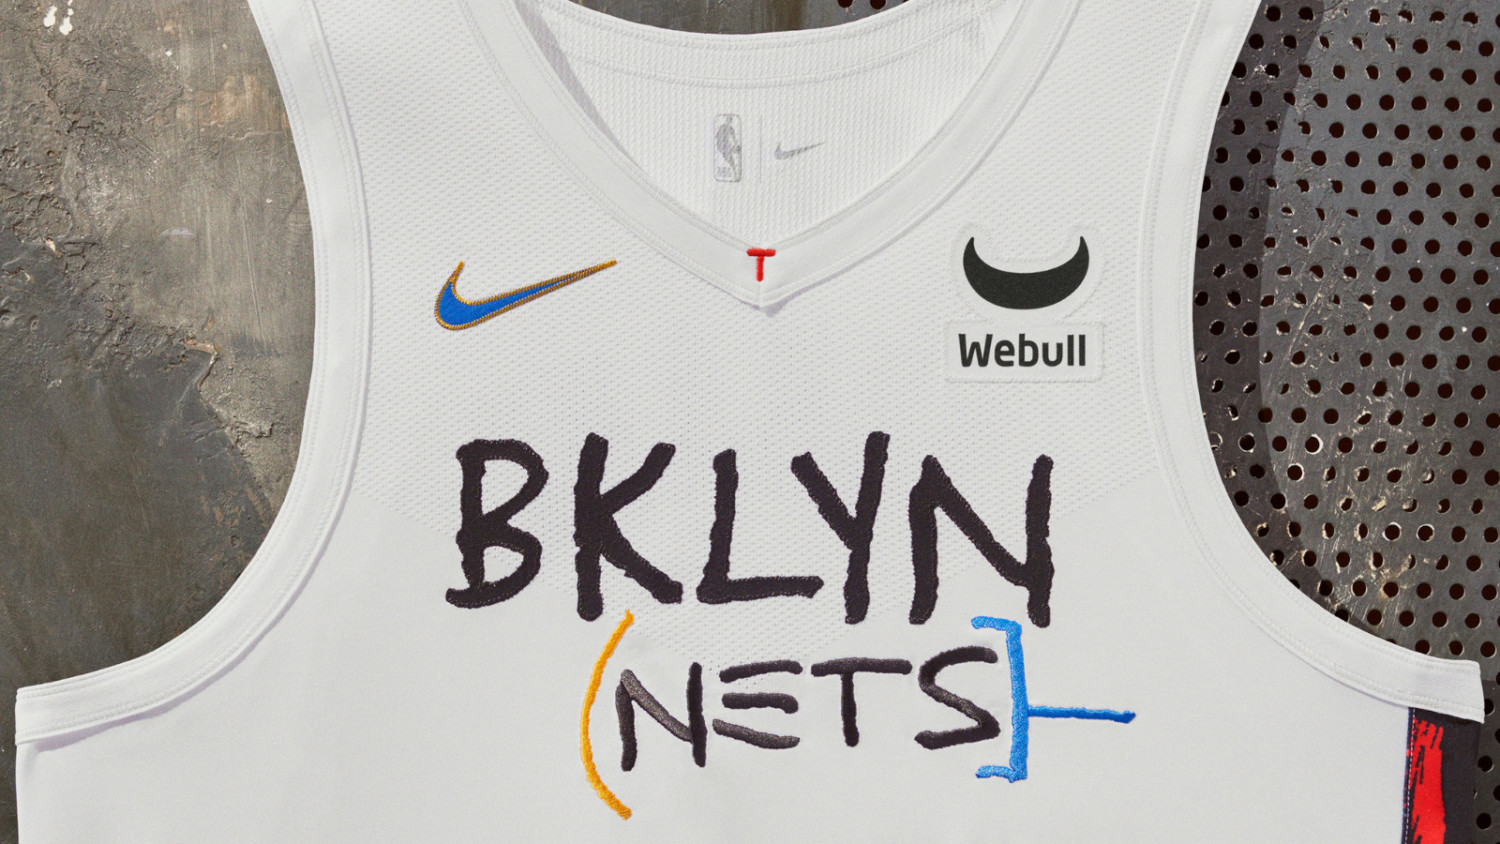 New NBA city uniforms: A Q&A with the designer and what to look